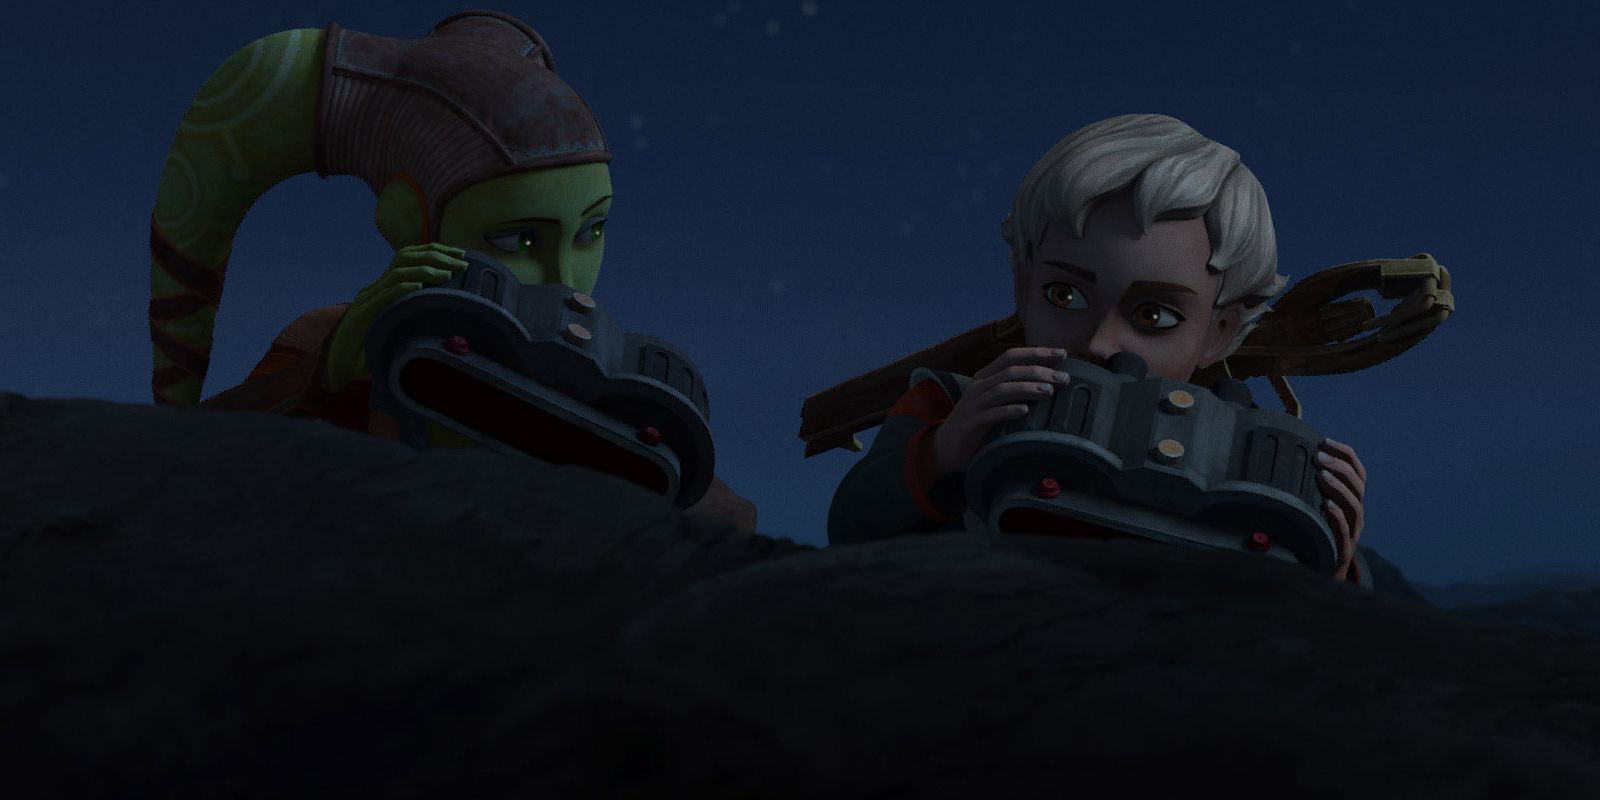 Hera and Omega hide behind a cliff and scout with binoculars in Star Wars The Bad Batch